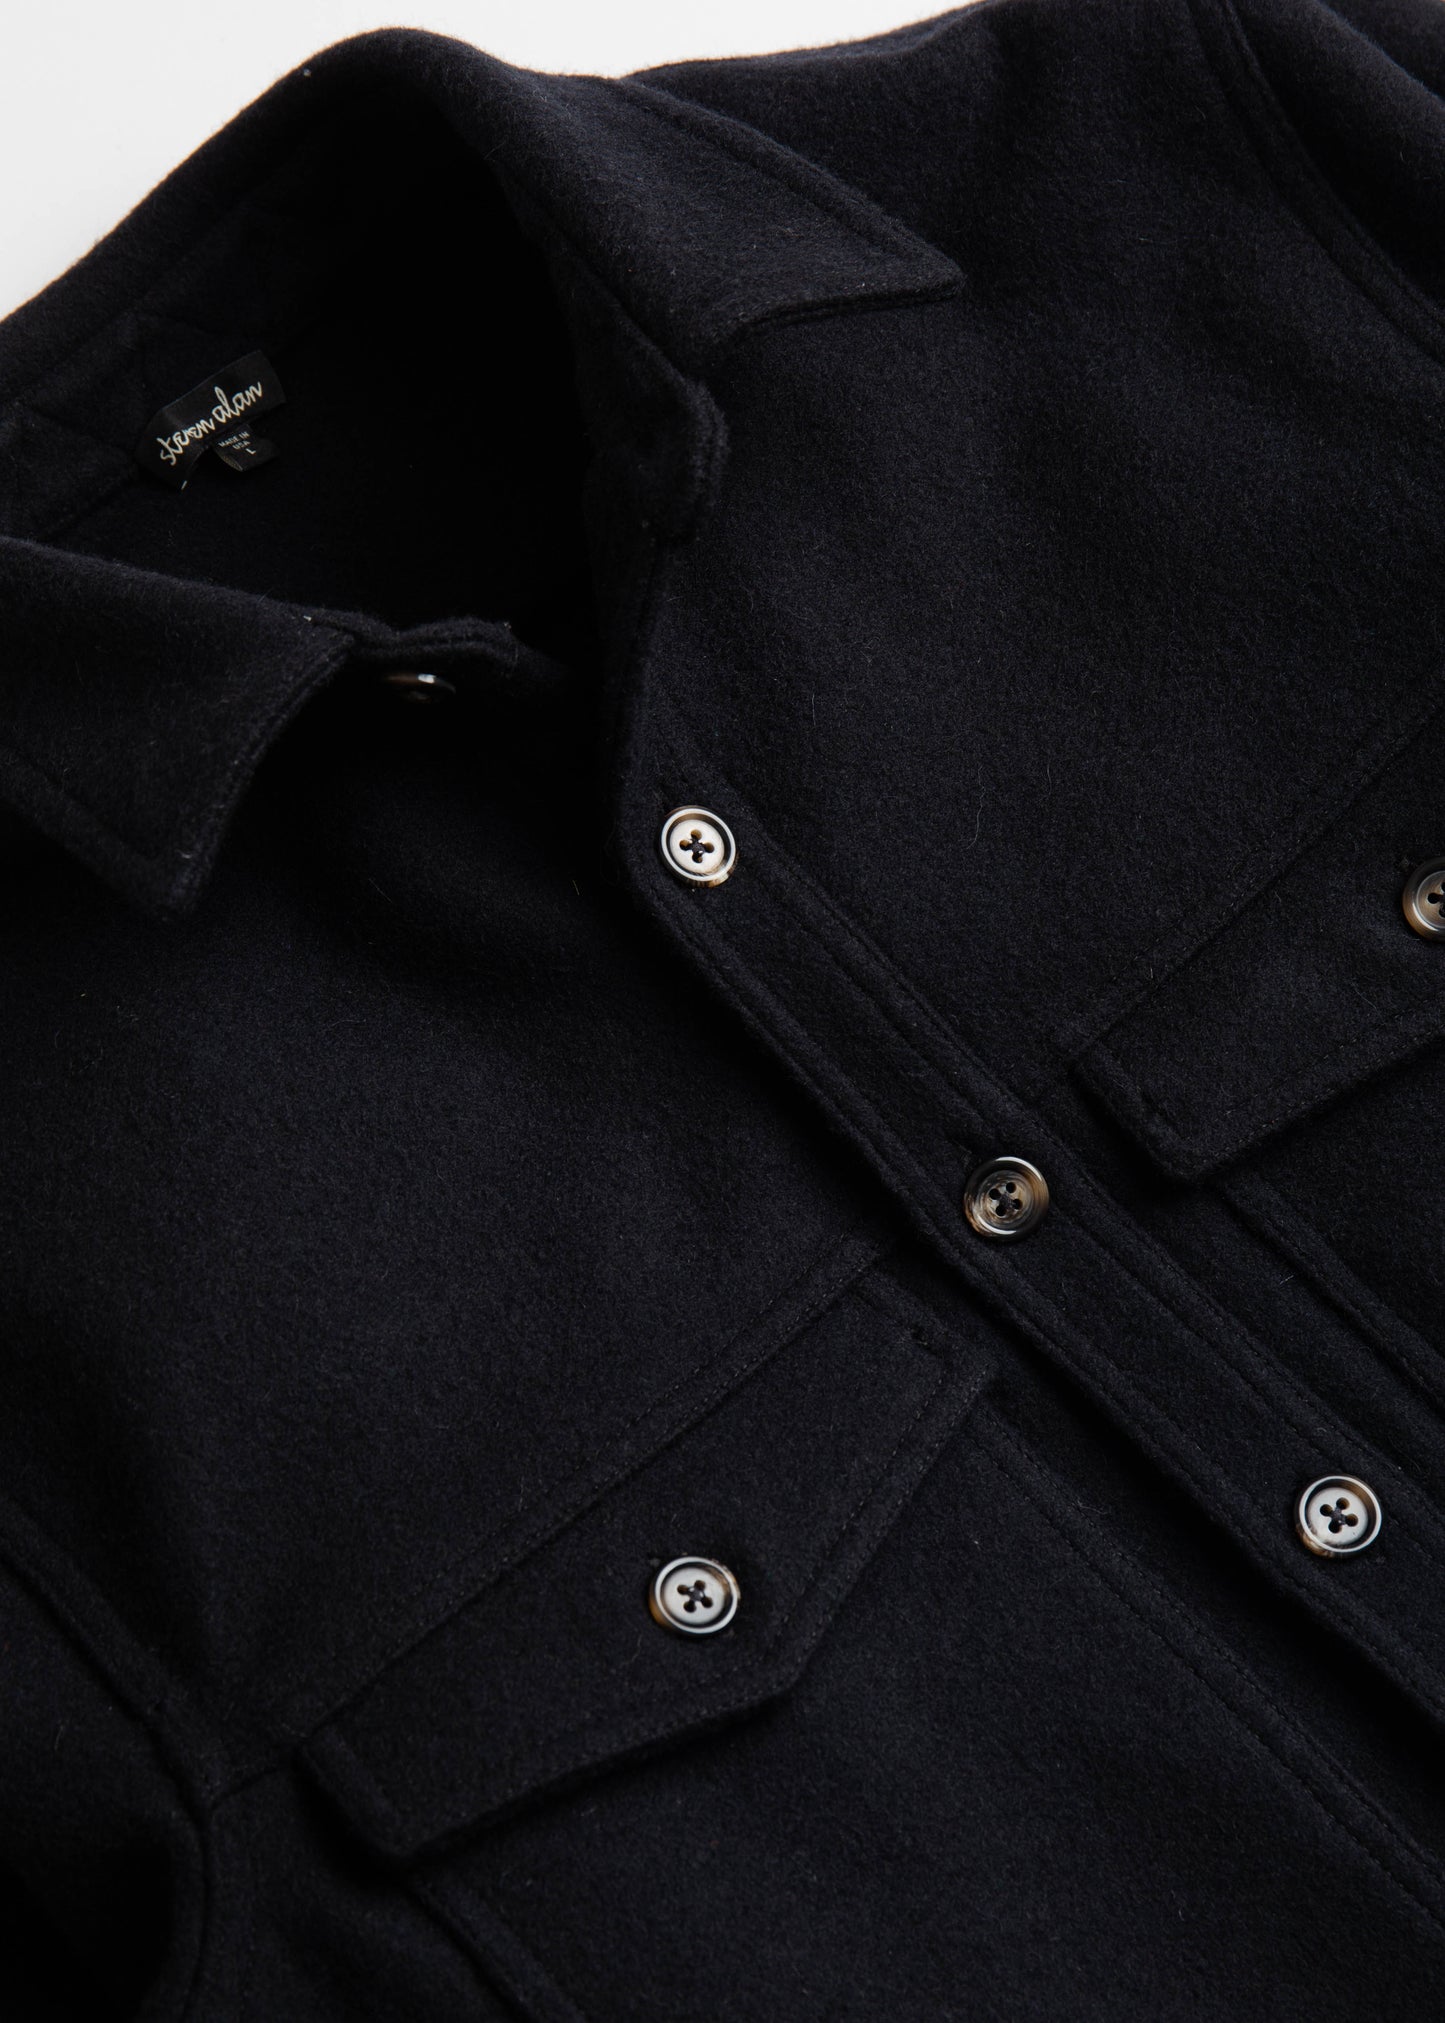 Close up of front flat lay of double pocket shirt jacket in color black melton wool